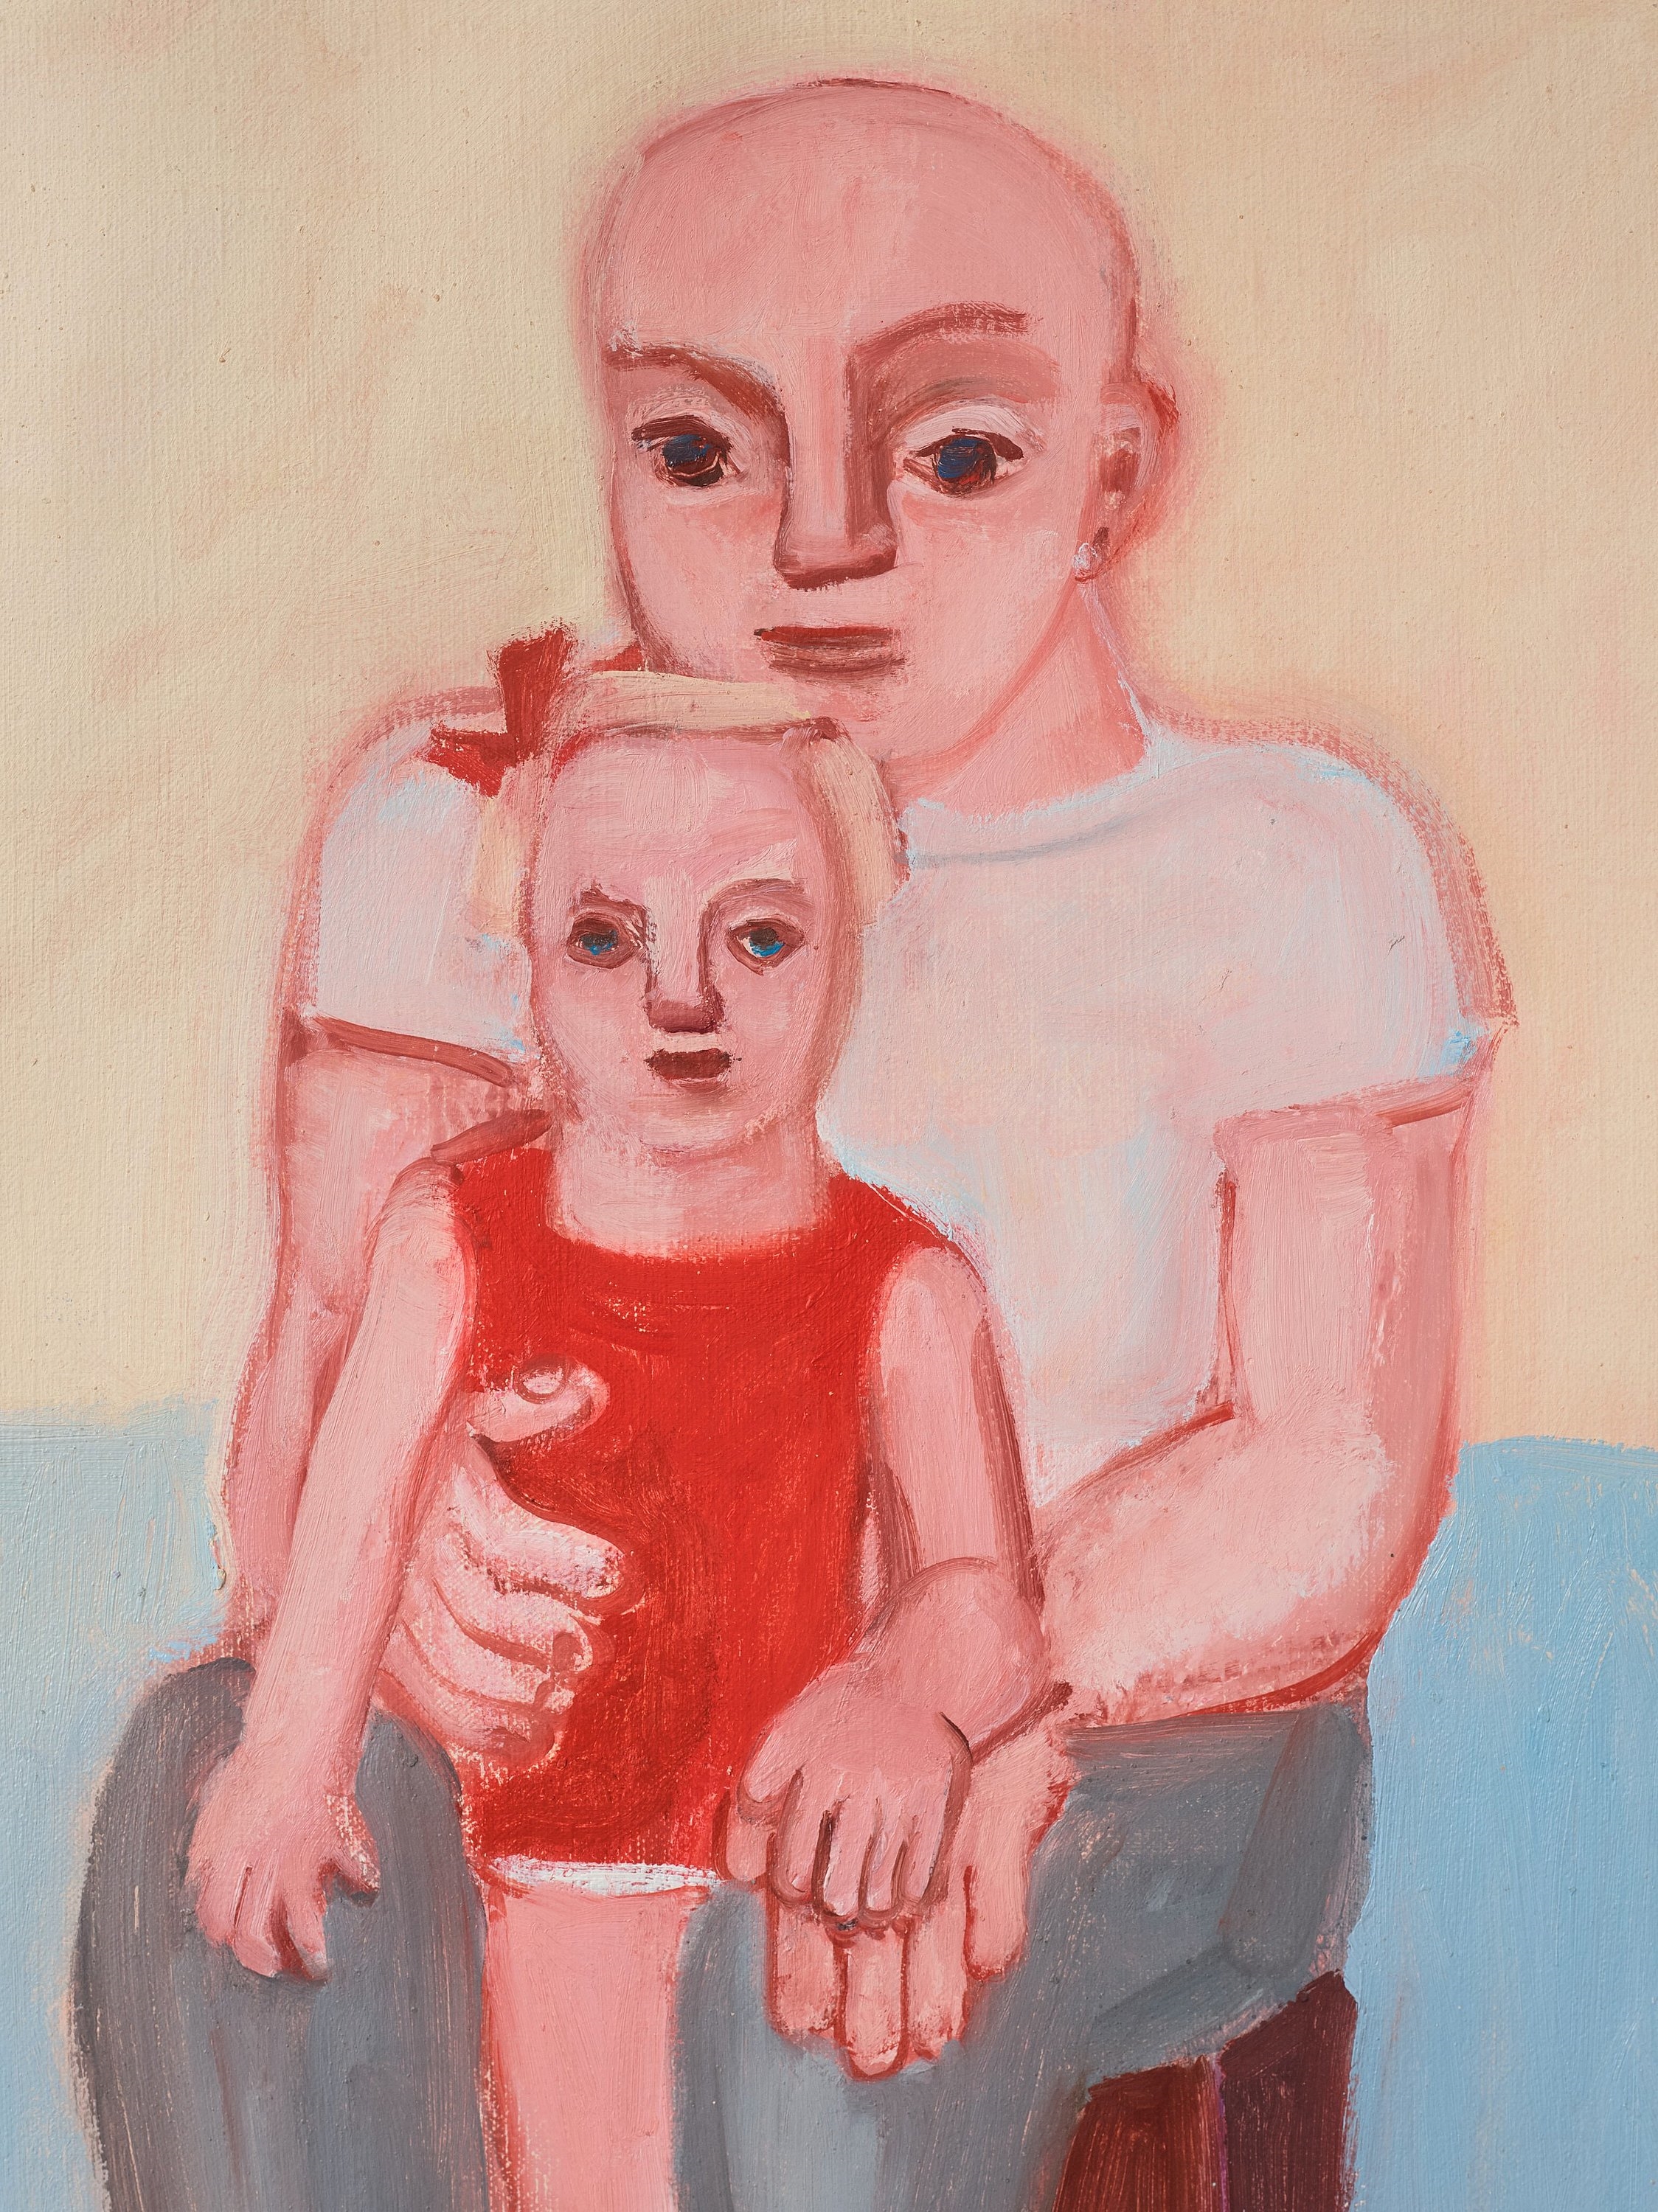 Artwork by Lena Cronqvist, 'Father and girl', Made of Canvas